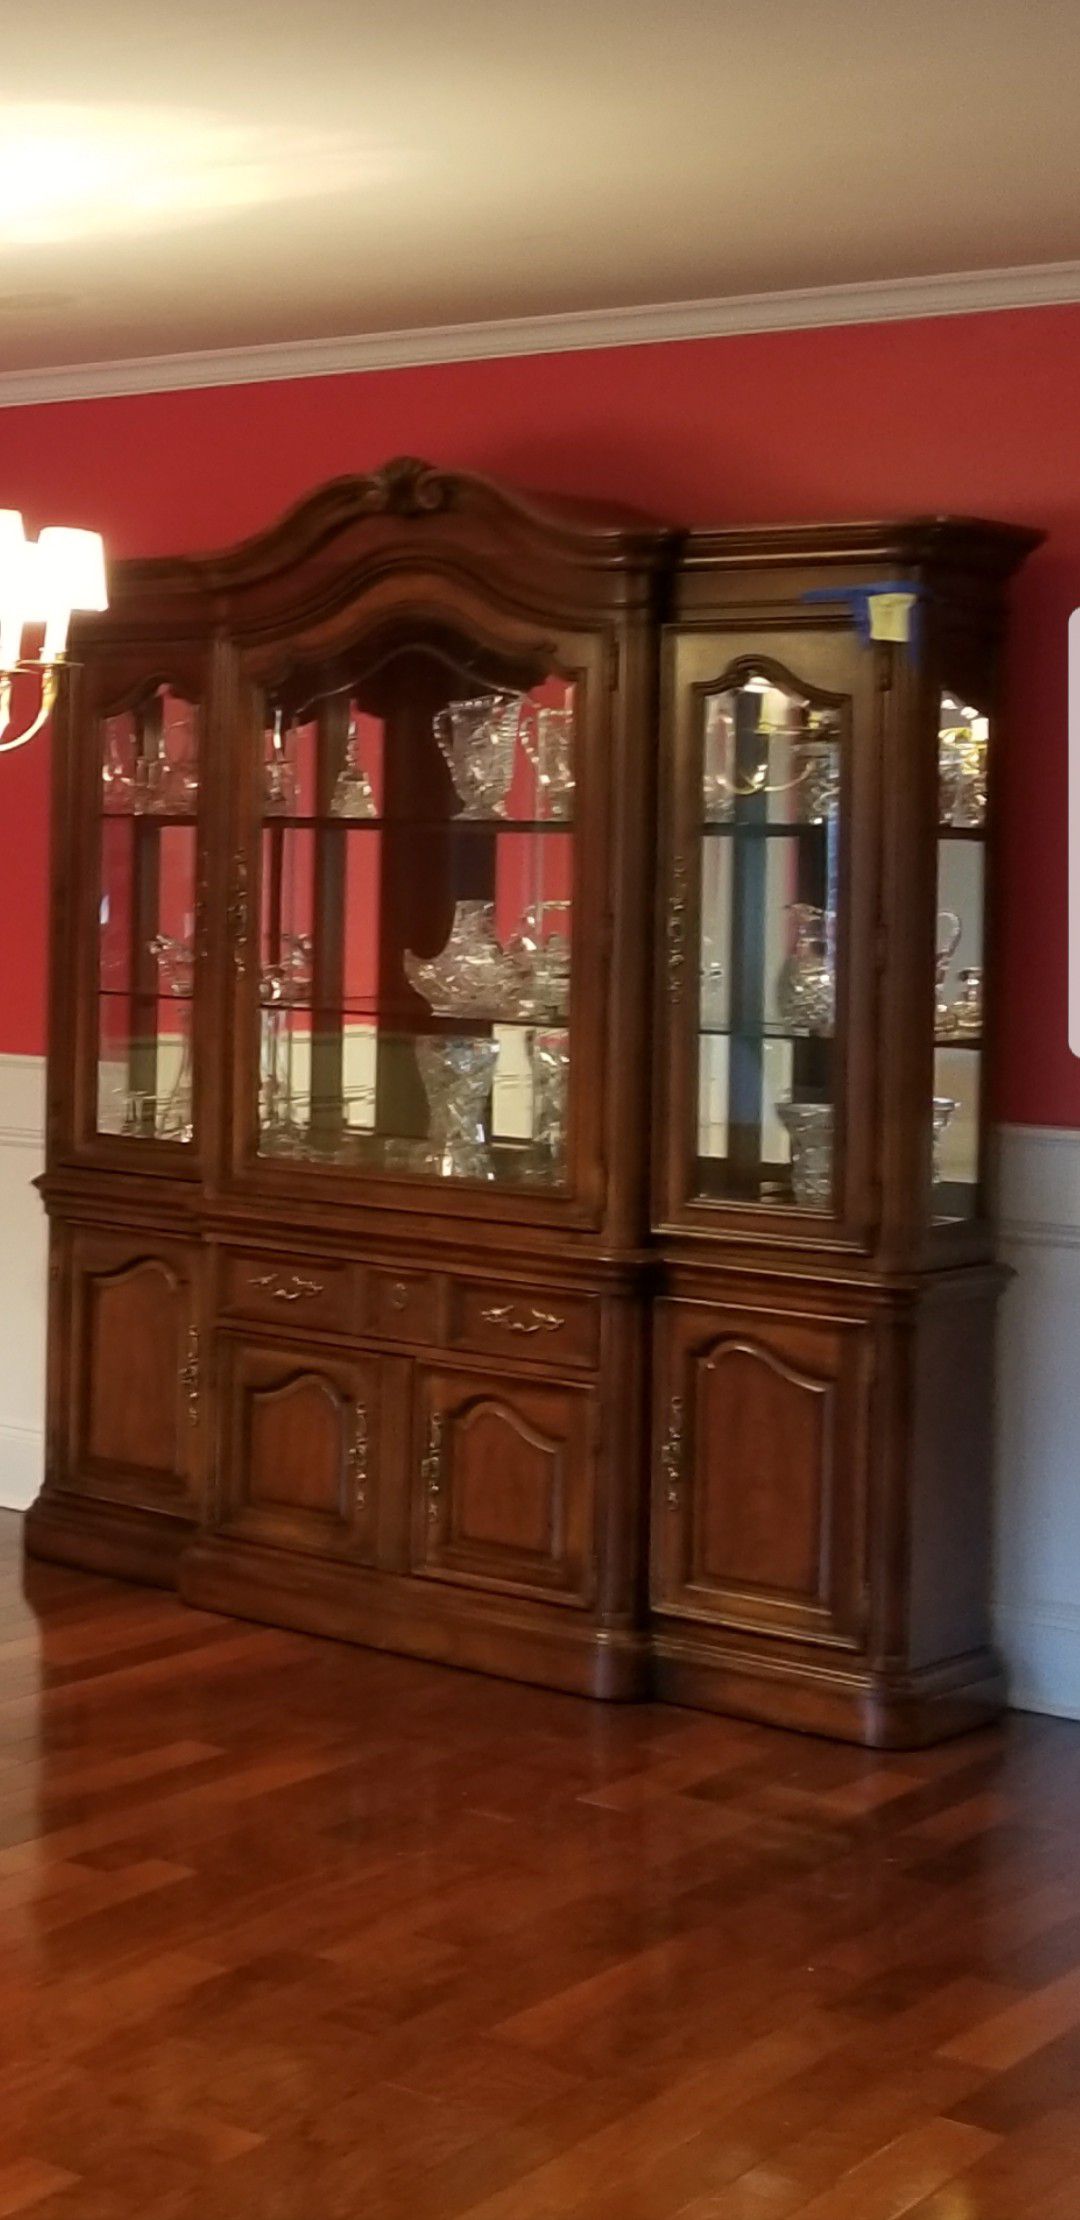 China Closet Display, Curio in Great Condition with glass shelves and dimmable lights..